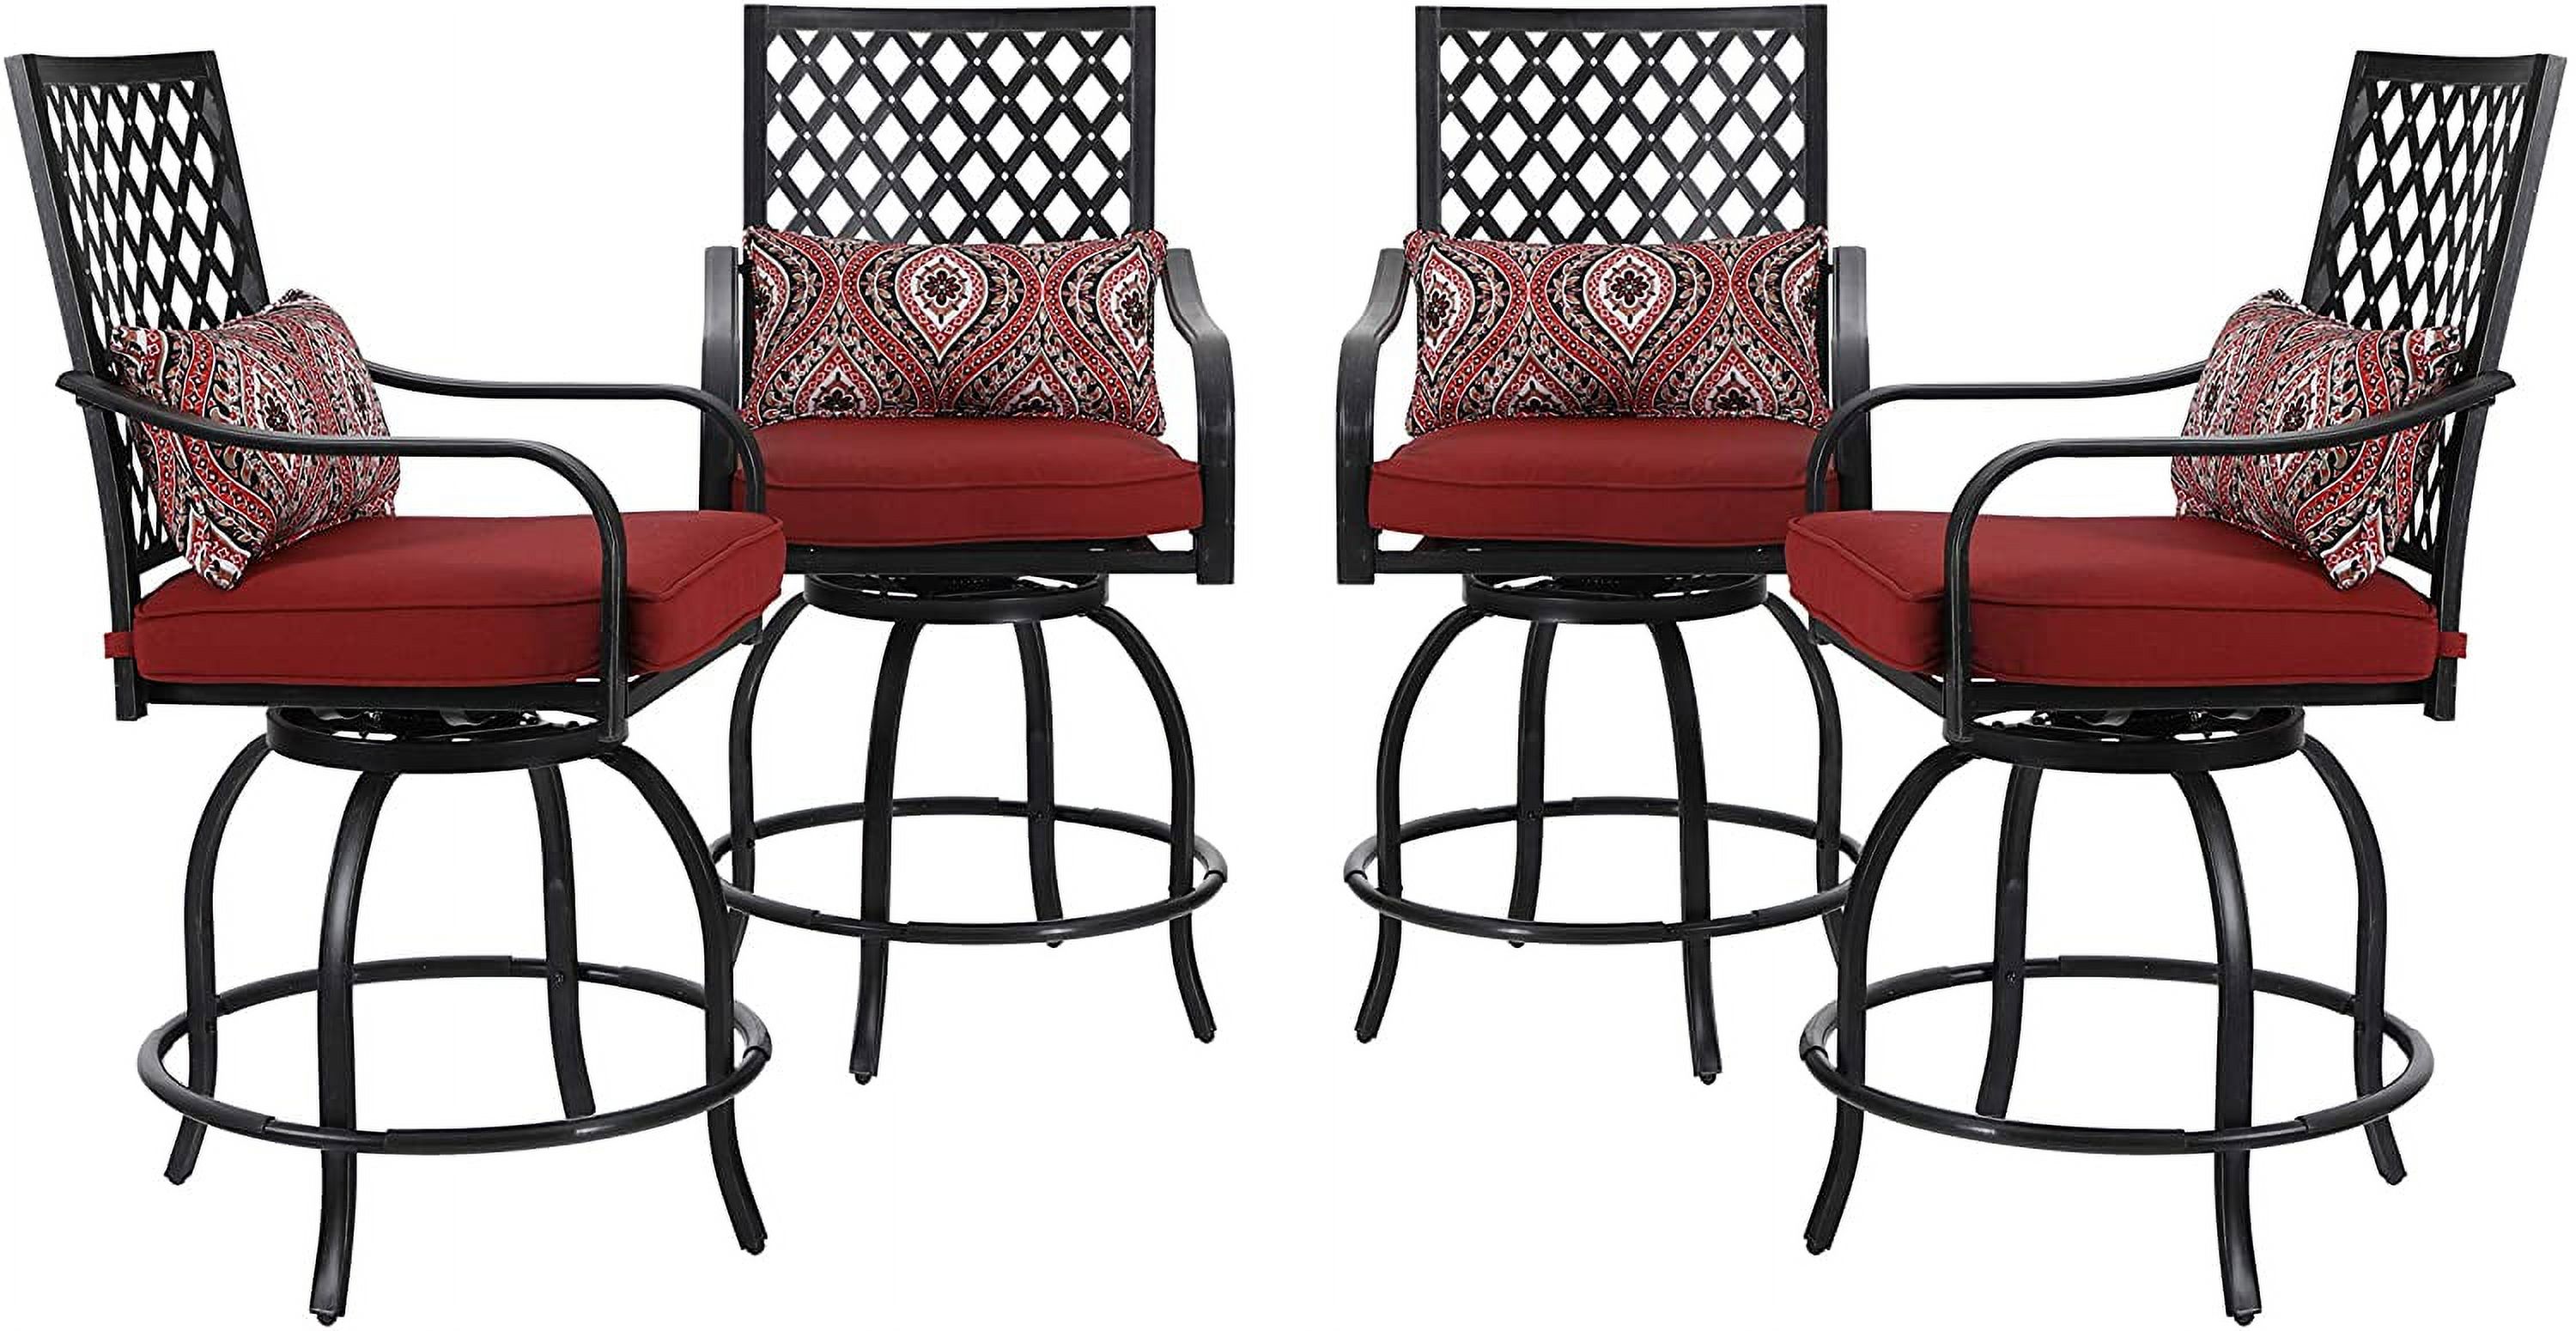 MF Studio 4-Piece Patio Dining Chairs Outdoor Swivel Bar Stools Extra Wide Height Modern Patio Furniture Suitable for Patio Garden Porch Dining Room with Red Cushion - image 1 of 6